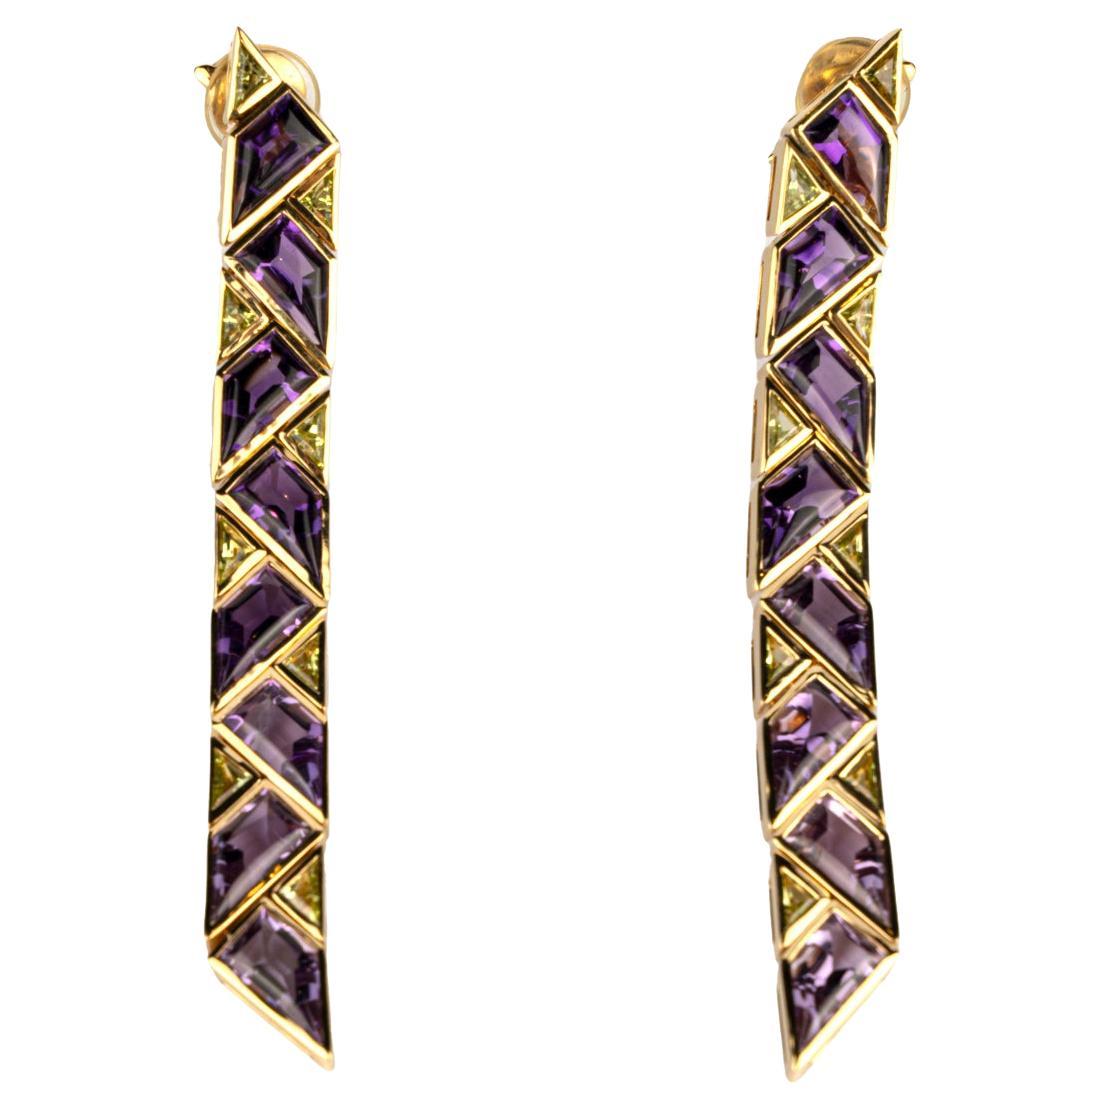 Marina B 'Pyramide' Topaz and 18k Gold Earrings For Sale